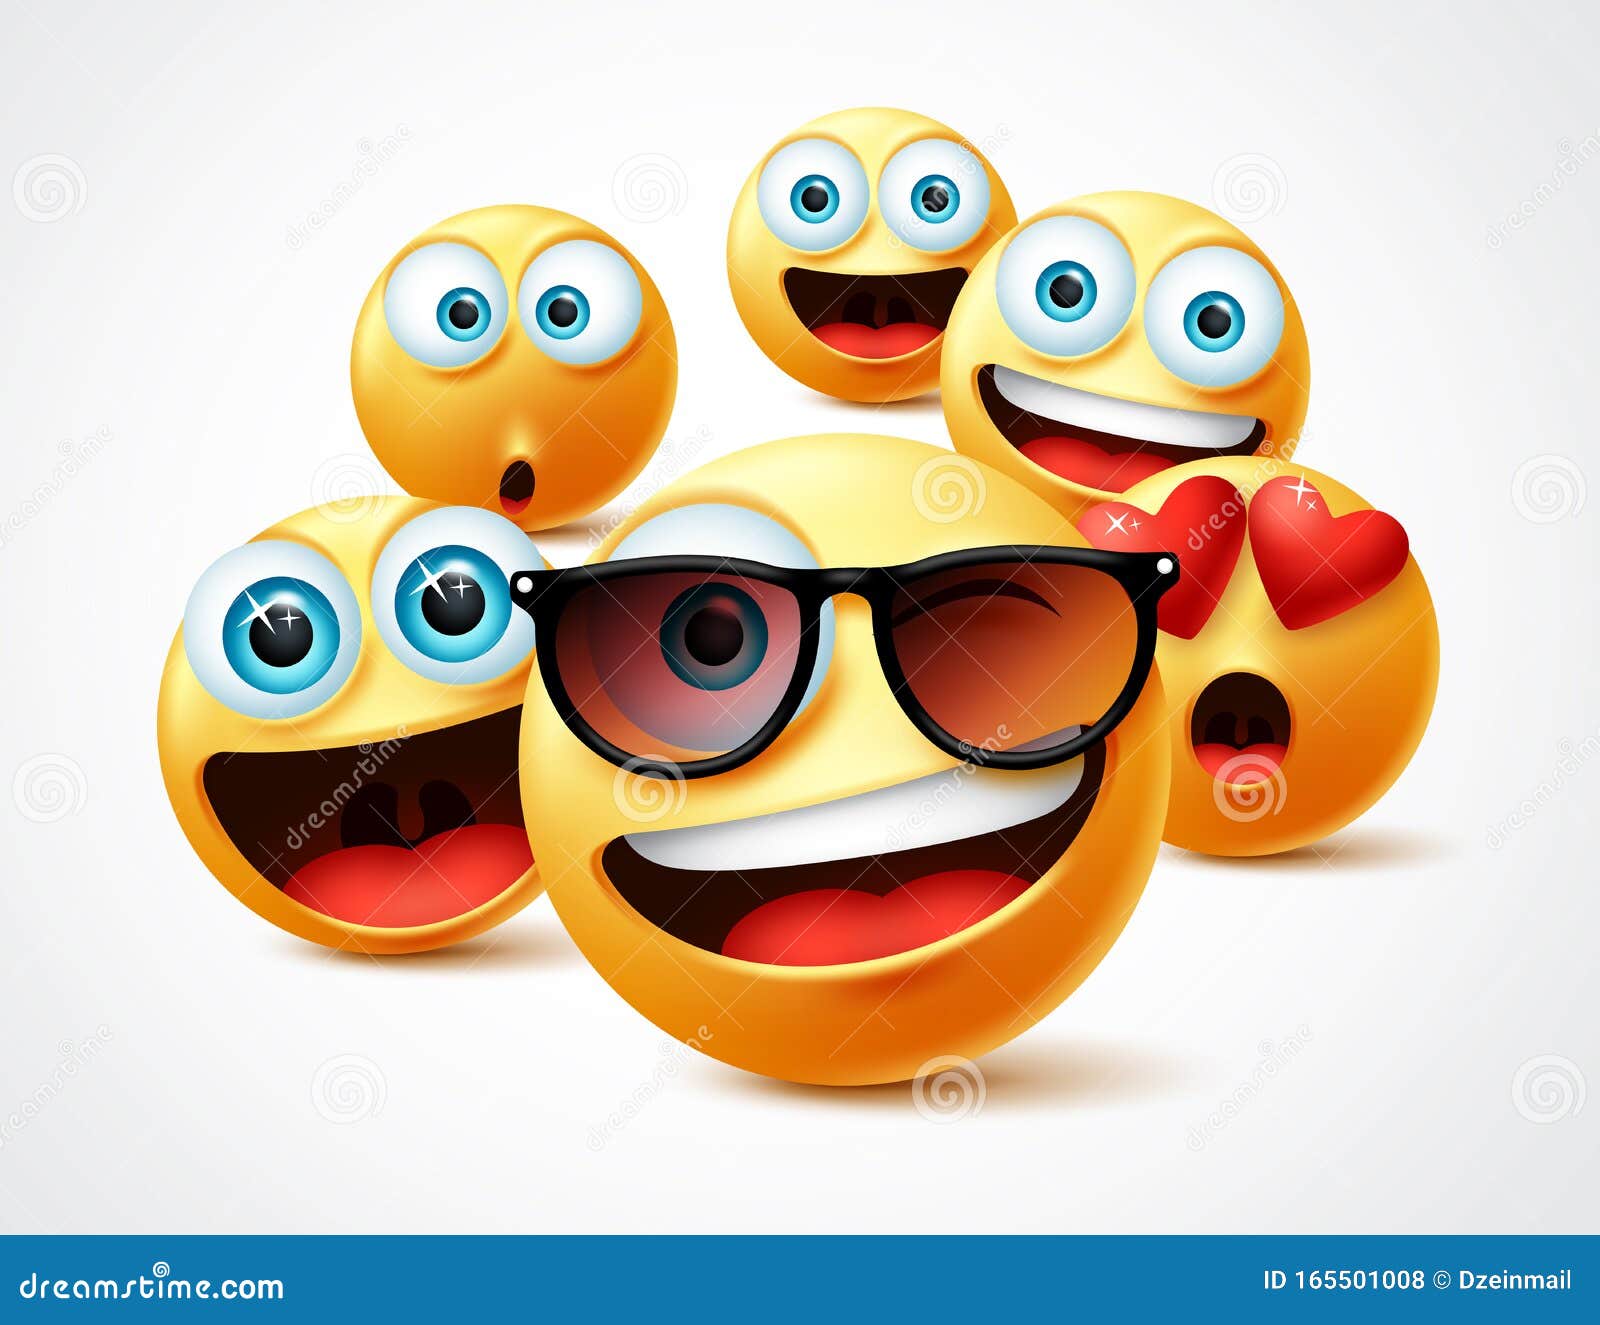 Free Funny Emoticons Download